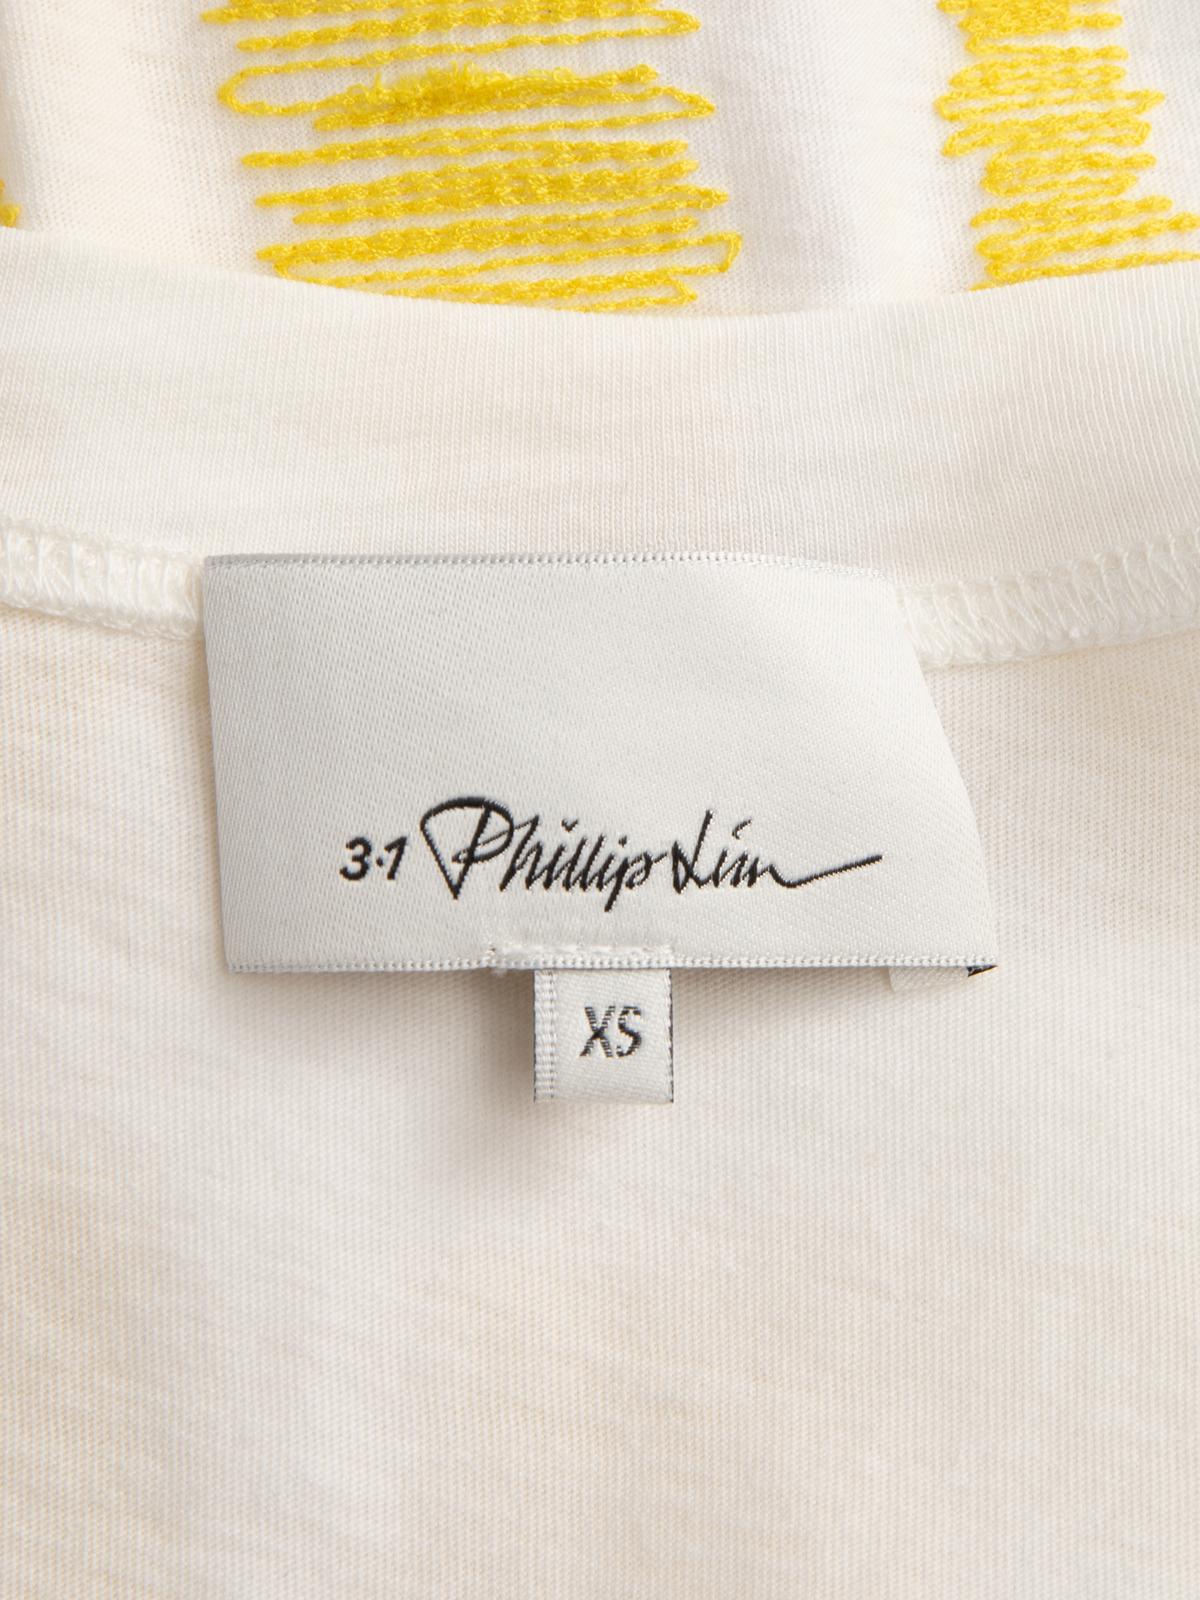 Pre-Loved 3.1 Phillip Lim Women's White Cotton Cropped T-Shirt with Yellow 2